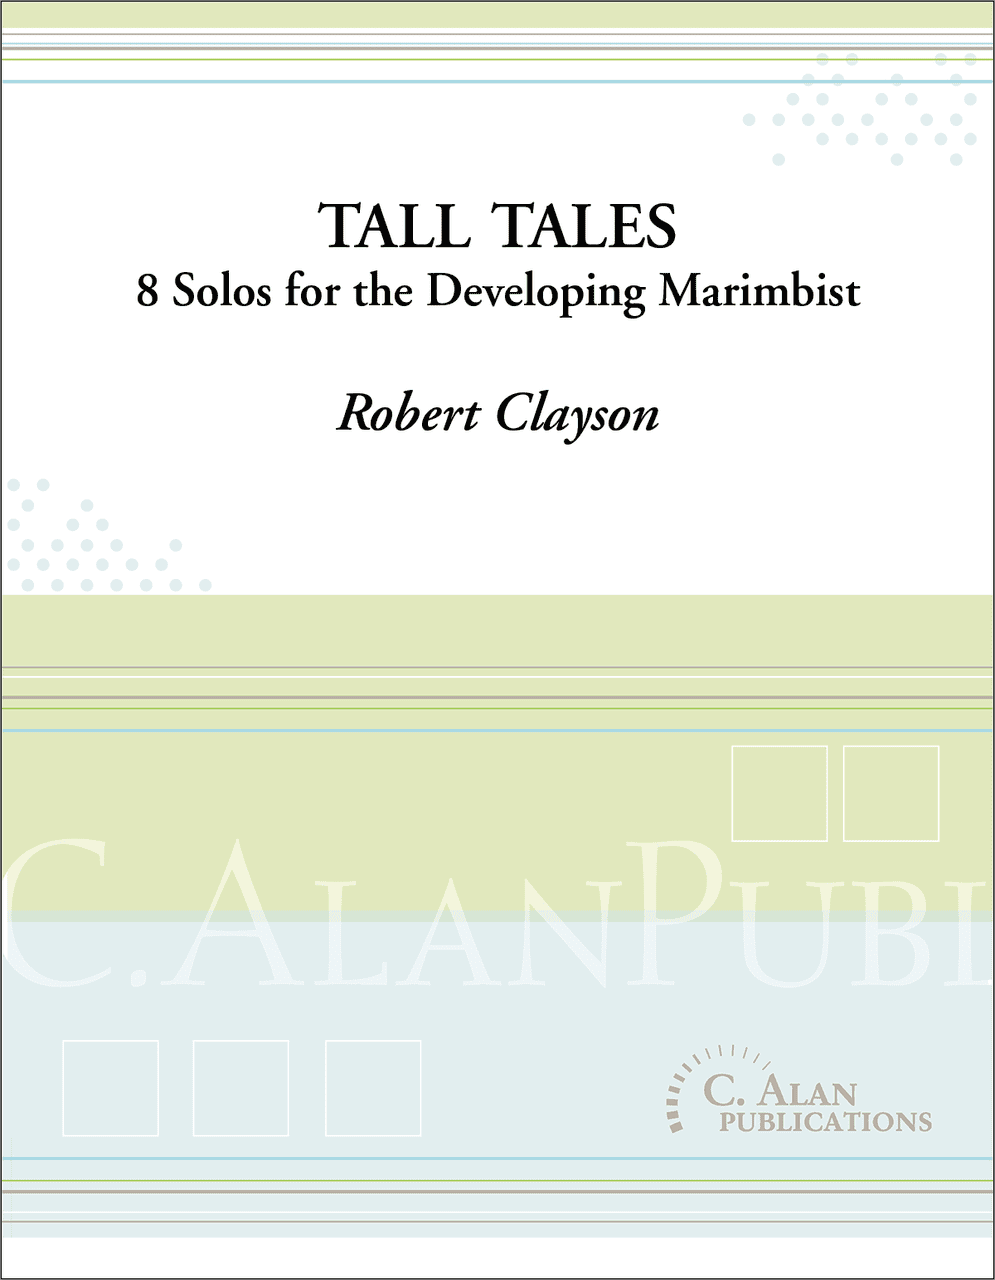 Tall Tales by Robert Clayson